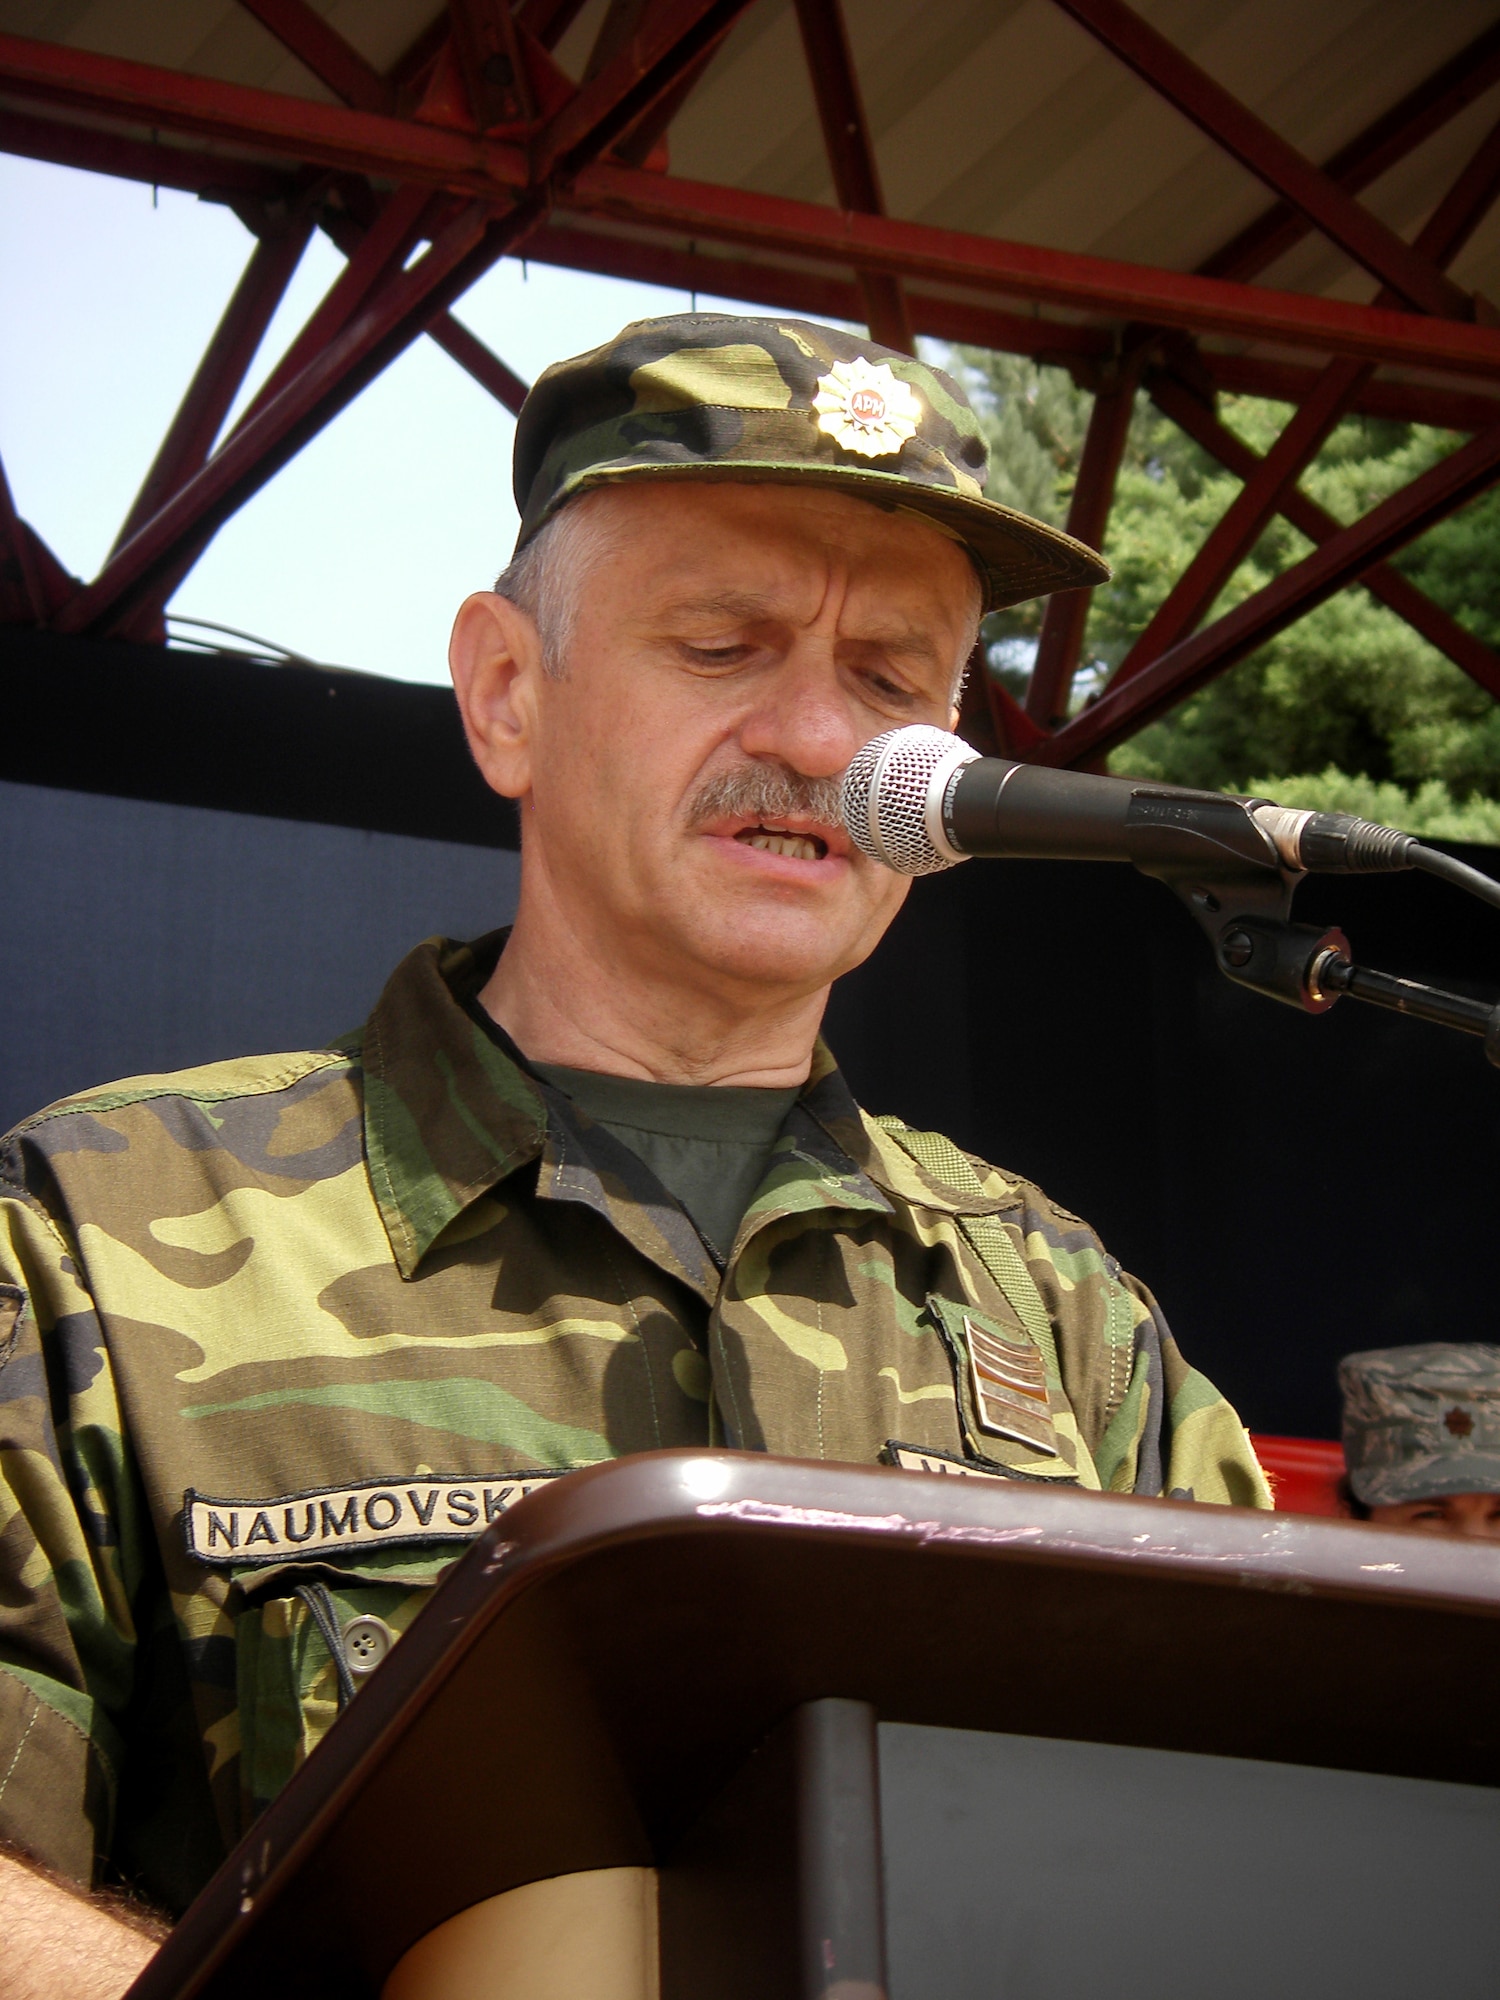 CAMP PEPELISHTE, Macedonia – Col. Andreja Naumovski, Macedonian co-director of Medical Training Exercise in Central and Eastern Europe, gives his opening remarks during the MEDCEUR 2011 opening ceremony here June 6.  The countries participating in this year’s MEDCEUR are Macedonia, Montenegro, Bosnia and Herzegovina, Serbia, Slovenia, Norway and the United States.  MEDCEUR is a Partnership for Peace and Chairman of the Joint Chiefs of Staff-sponsored regional and multilateral exercise in Central and Eastern Europe designed to provide medical training and operational experience in a deployed environment.  (U.S. Air Force photo/Master Sgt. Kelley J. Stewart)